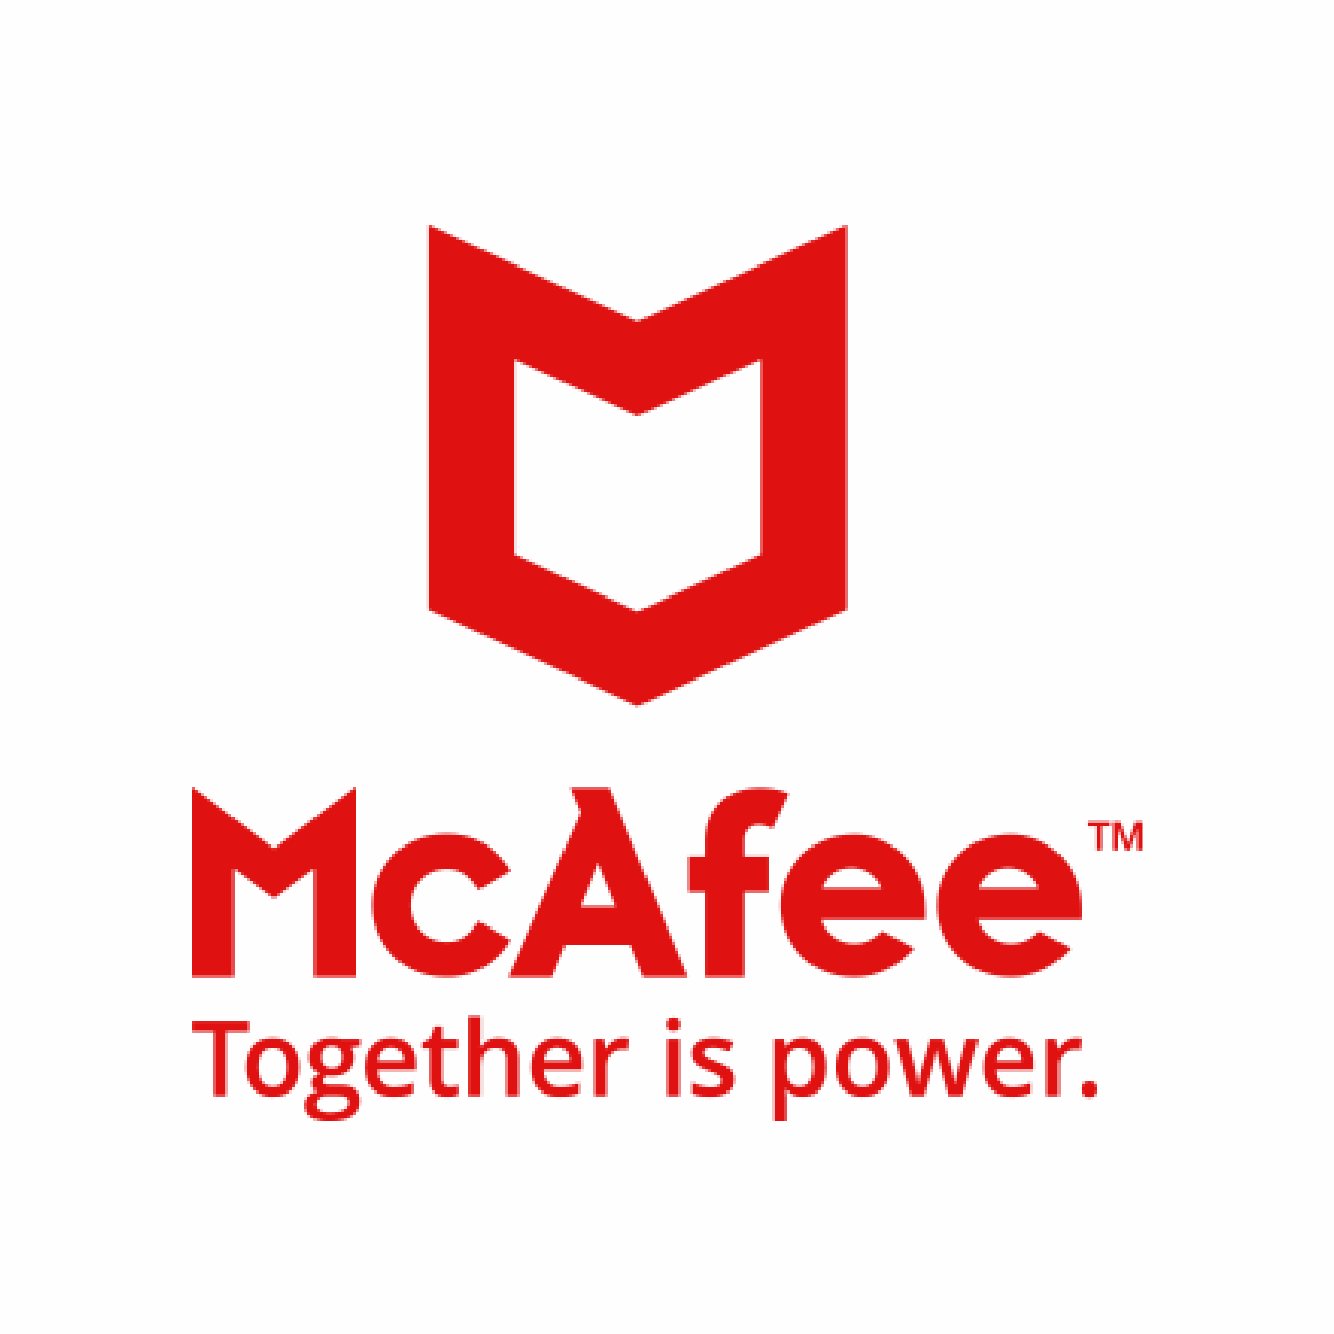 http://securetech.ae/wp-content/uploads/2019/02/21.MCAFEE.AXIS_.png